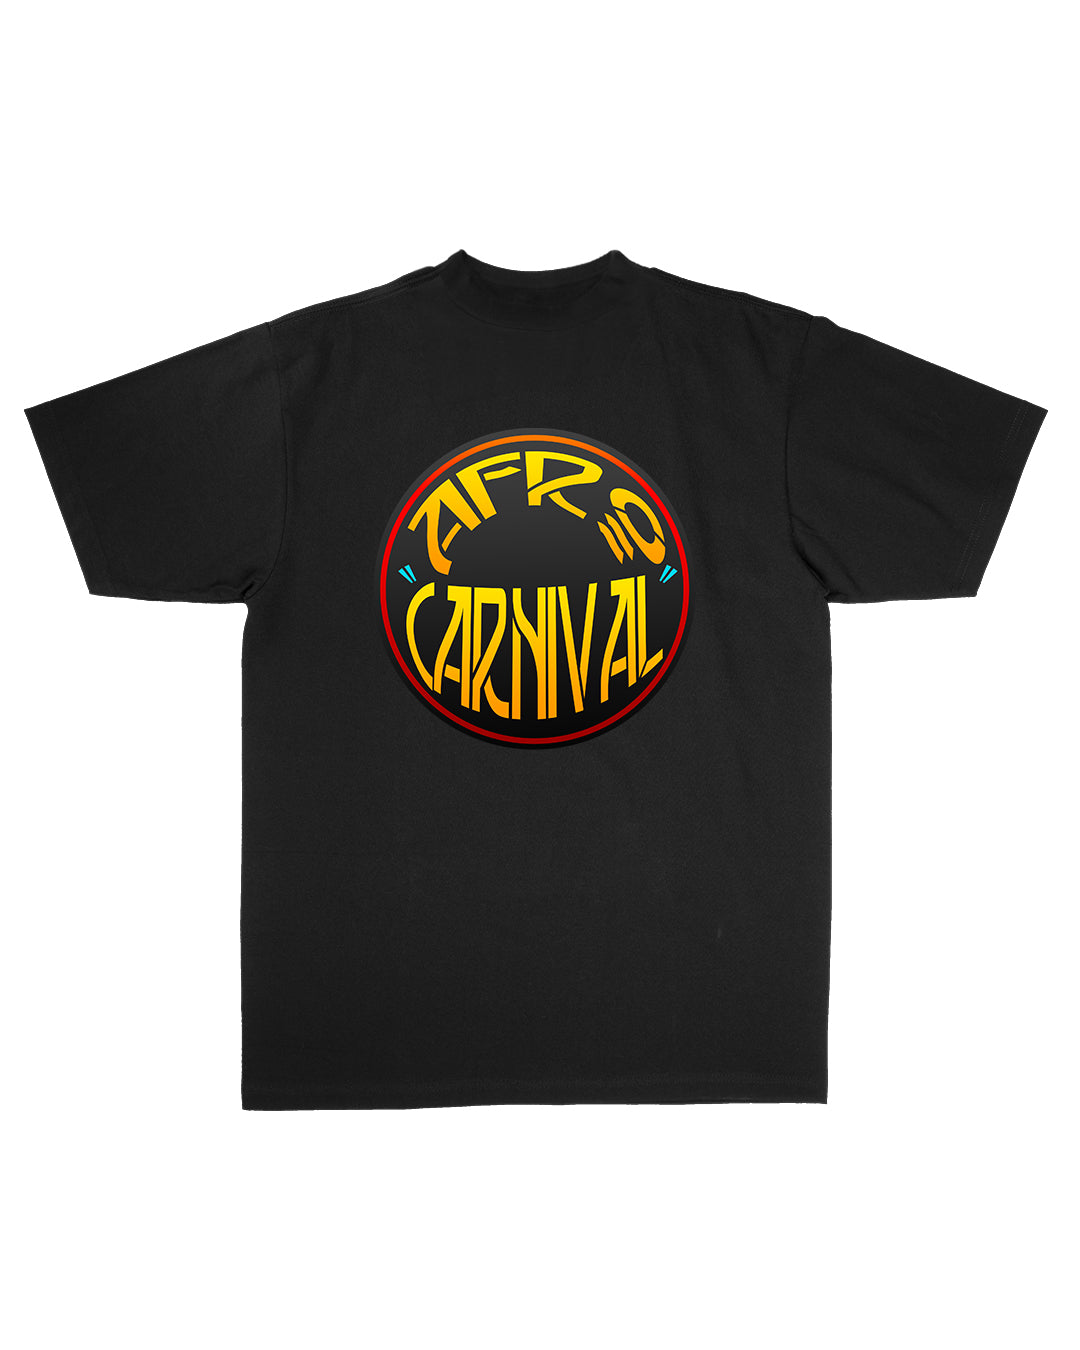 AFRO CARNIVAL T-SHIRT — black and yellow